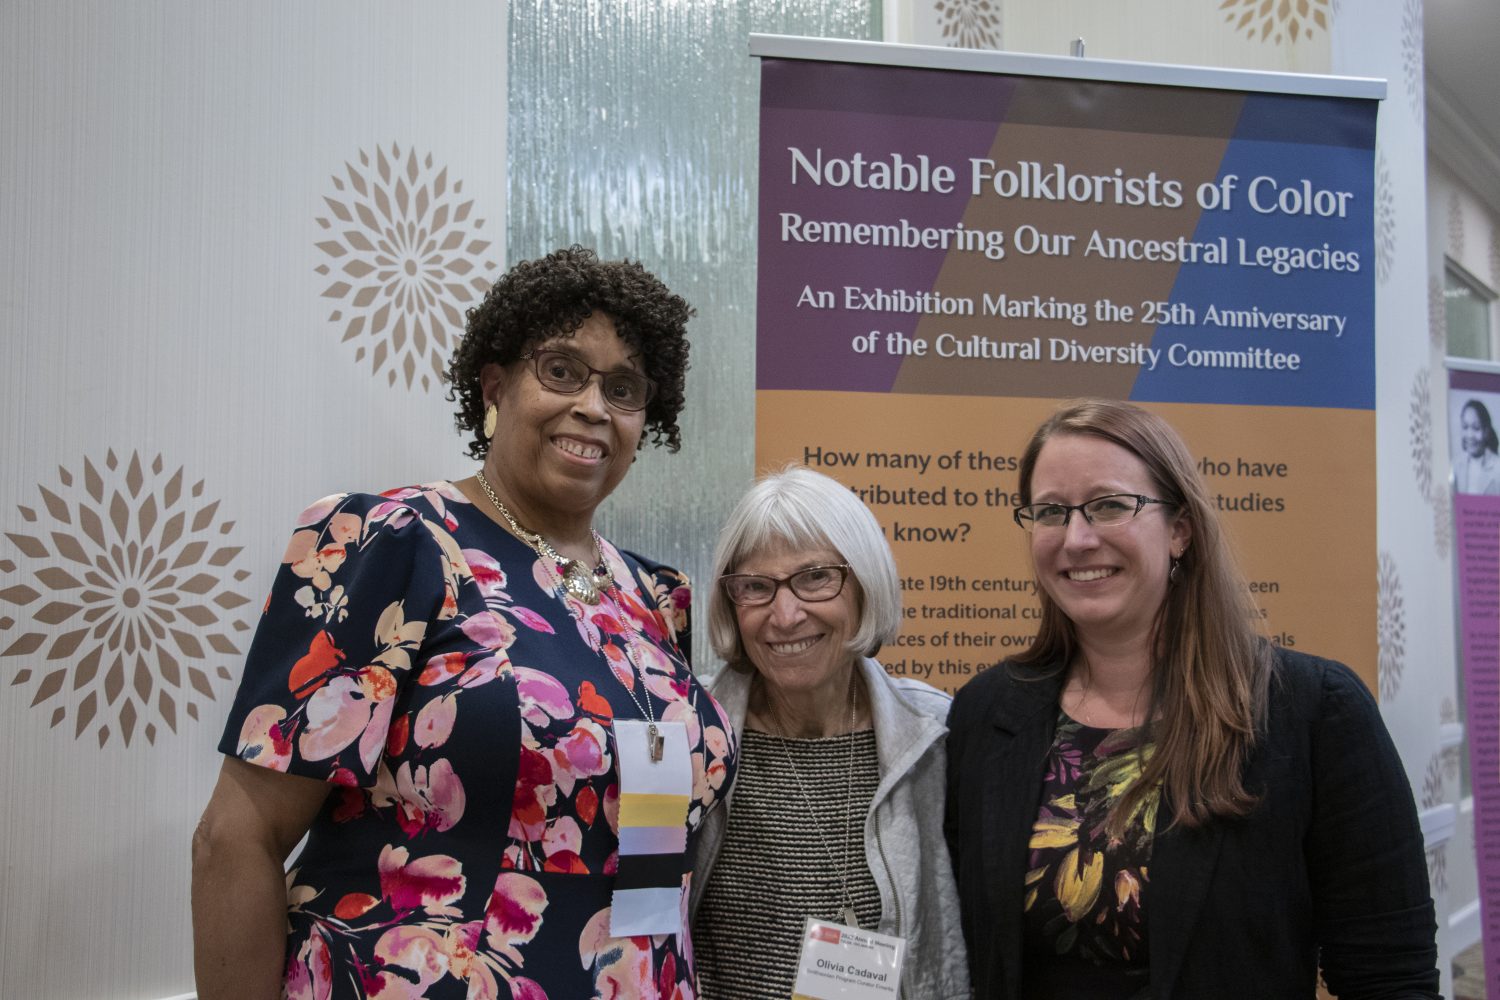 Notable Folklorists of Color creators standing in front of the title exhibition banner